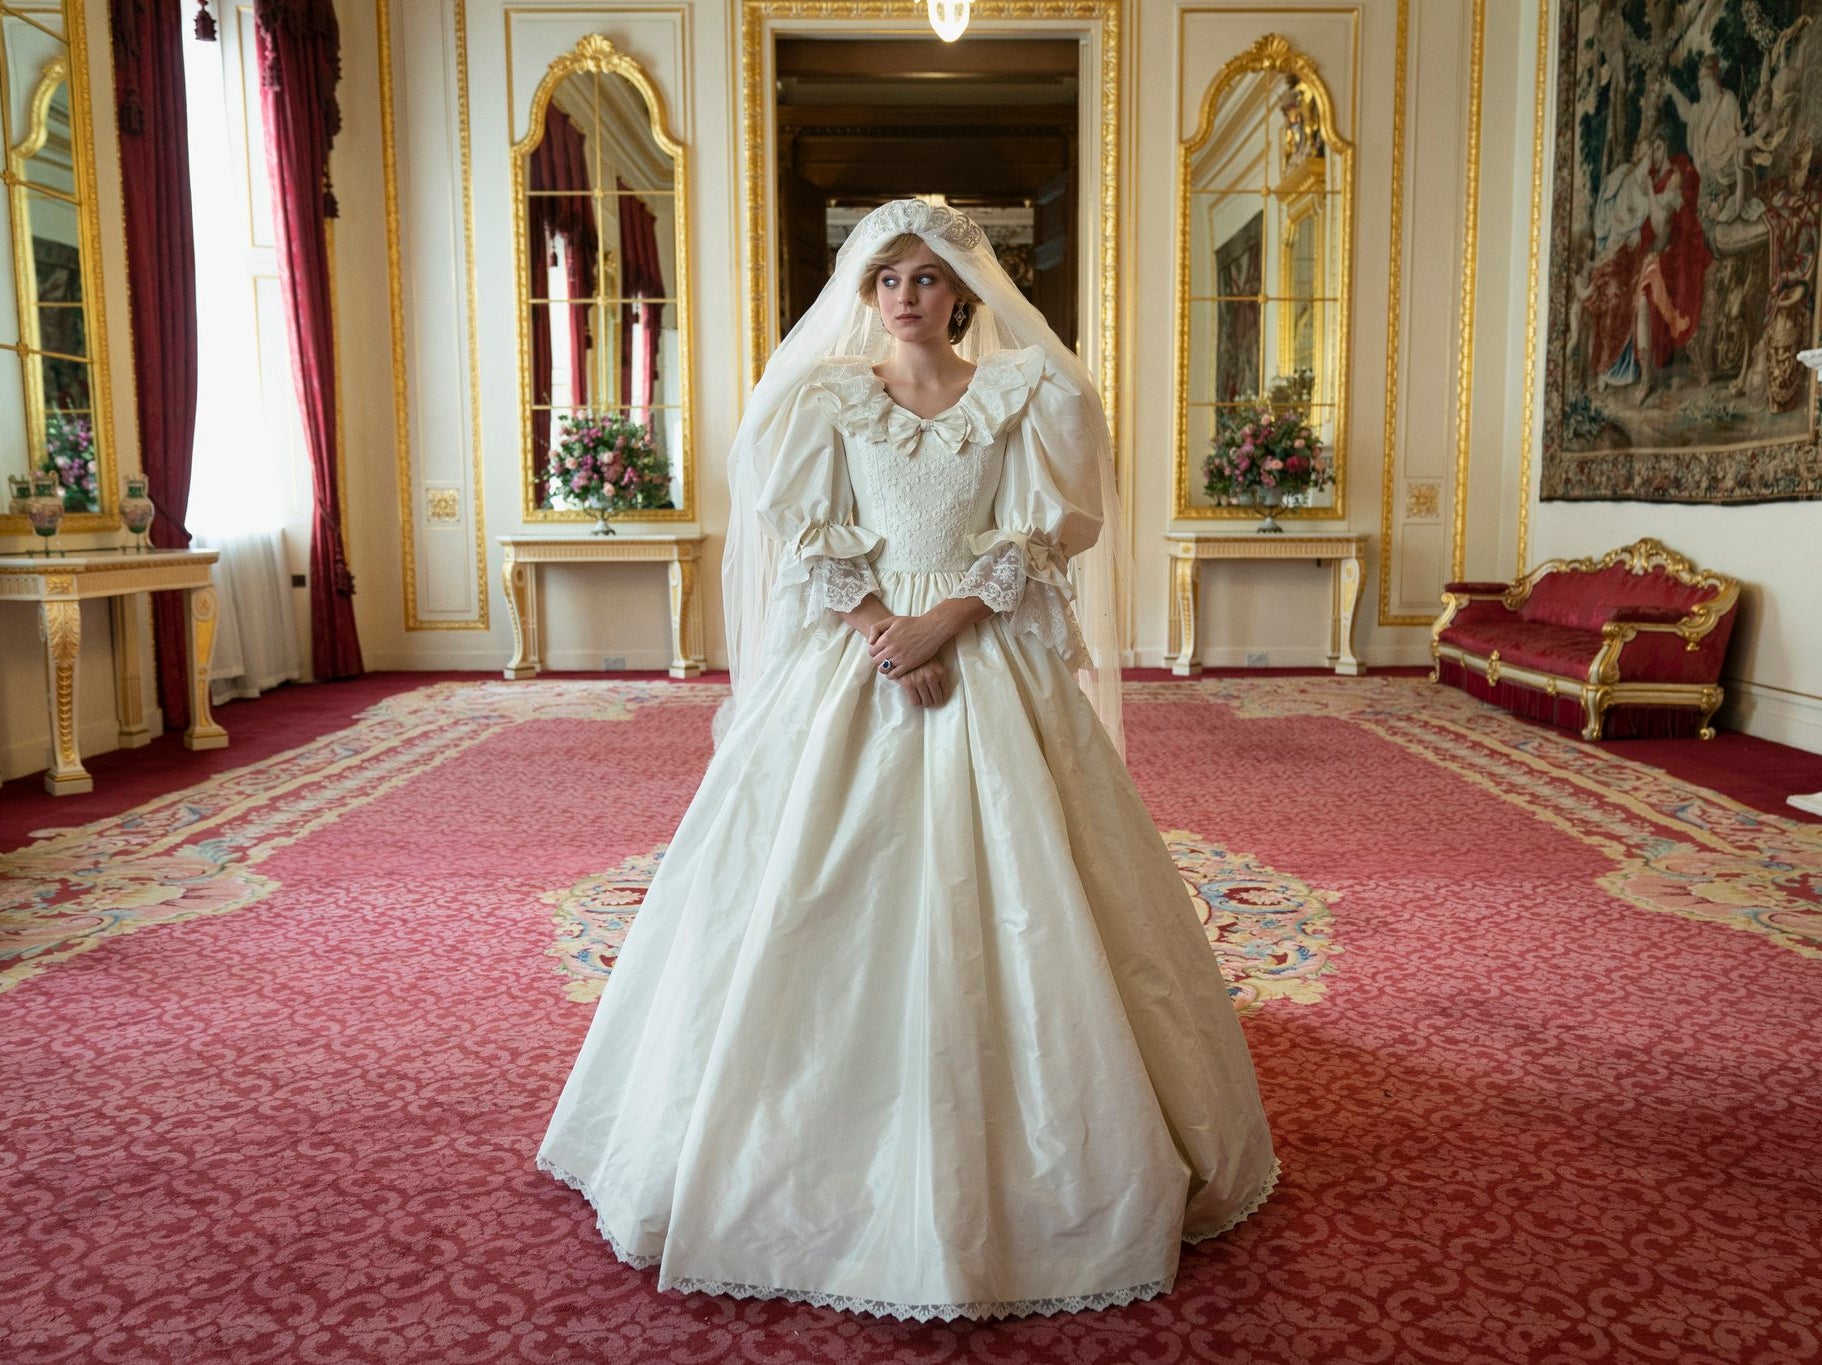 Lady Diana Spencer (Emma Corrin) on her wedding day in 'The Crown' season four